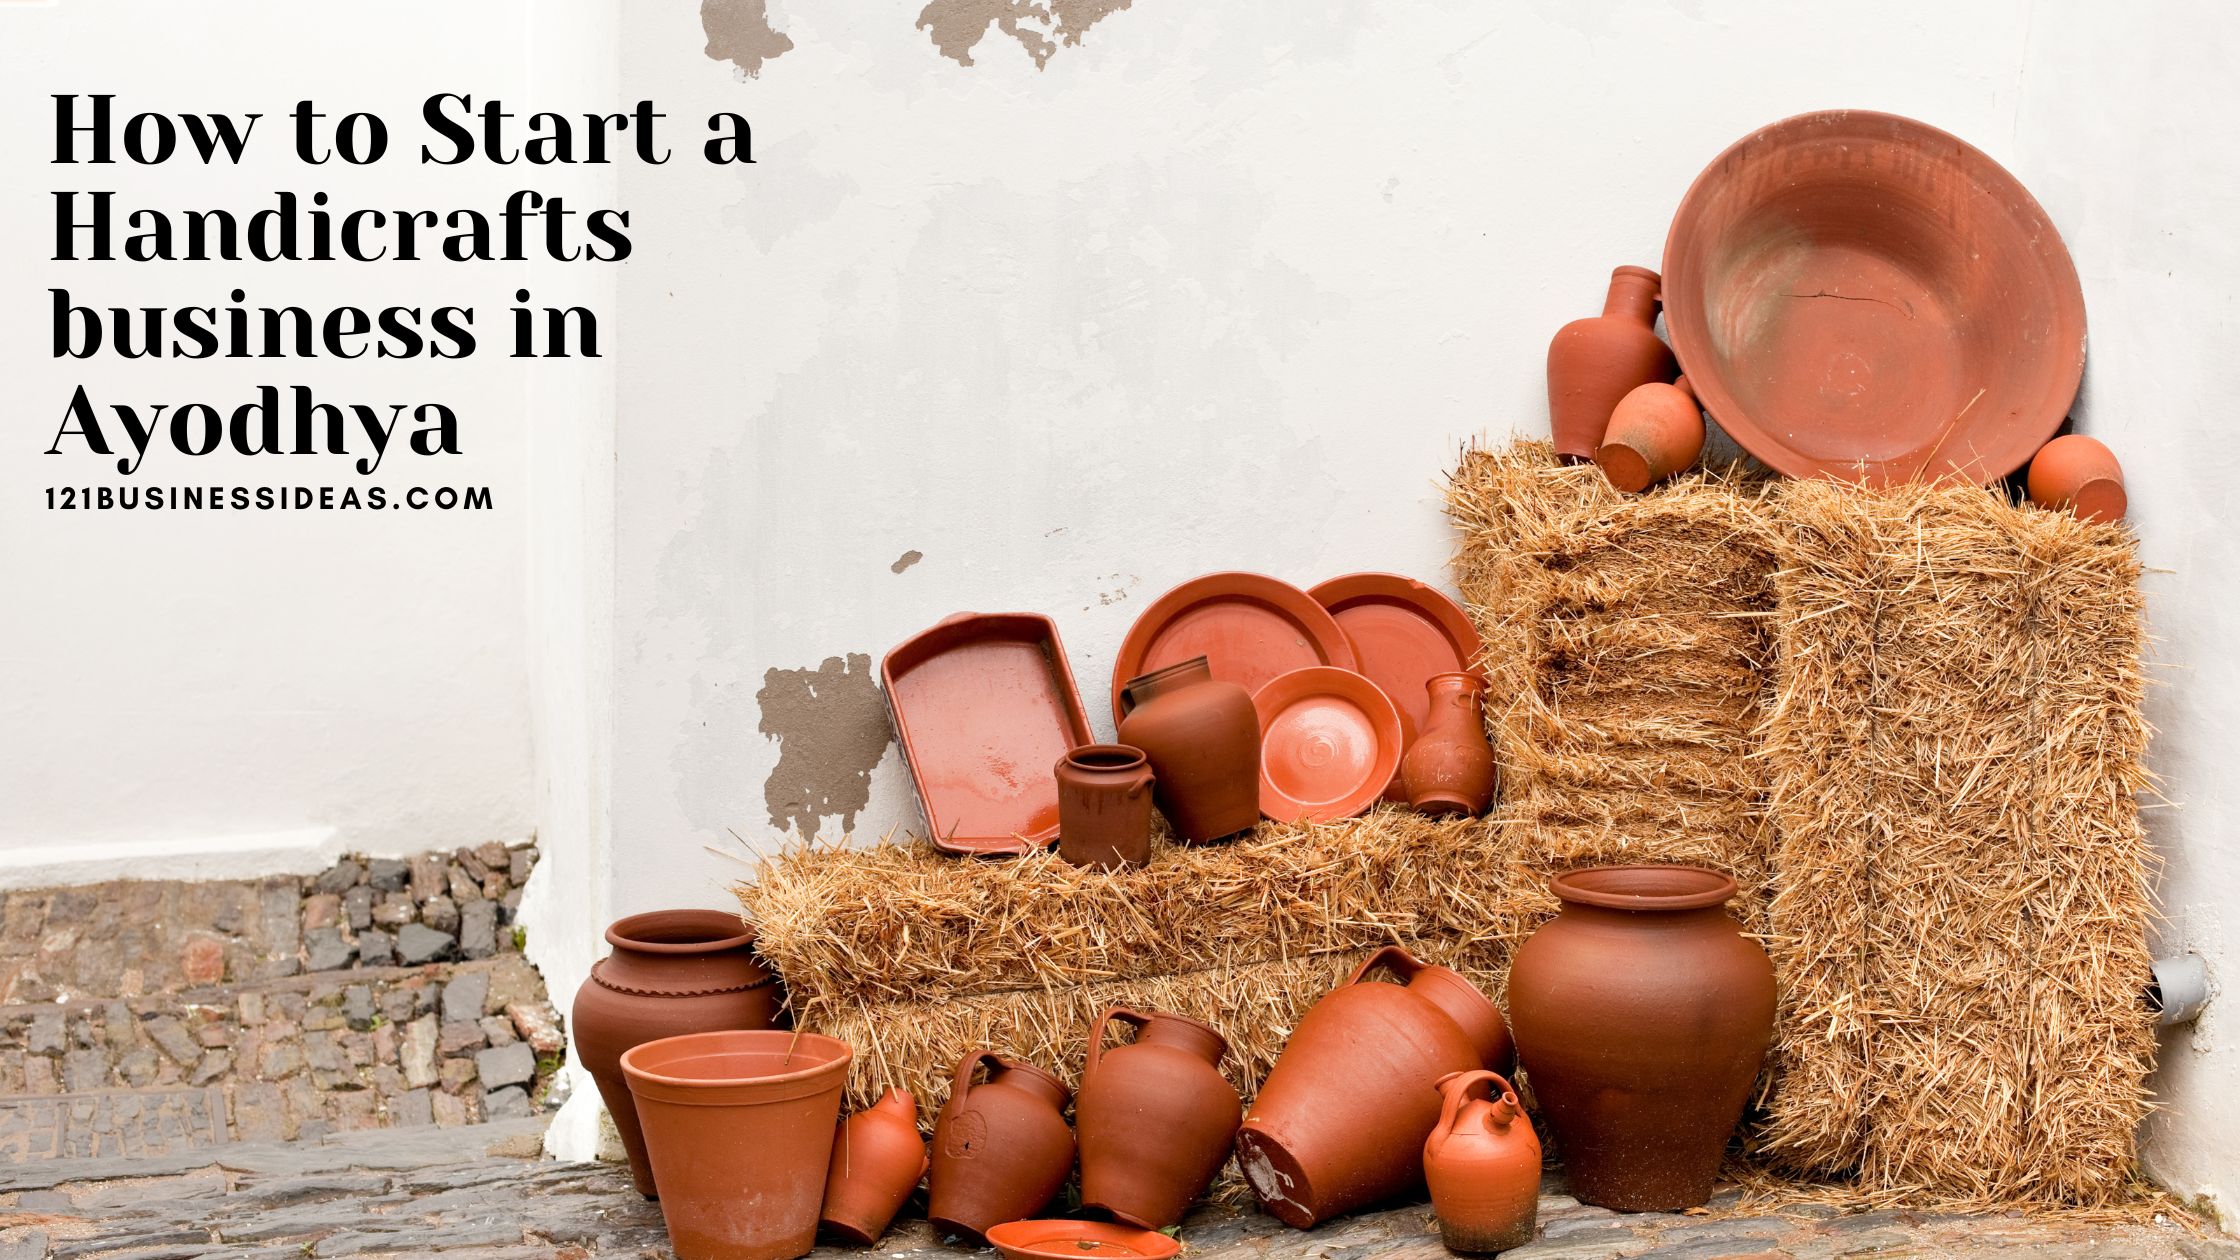 How to Start a Handicrafts business in Ayodhya